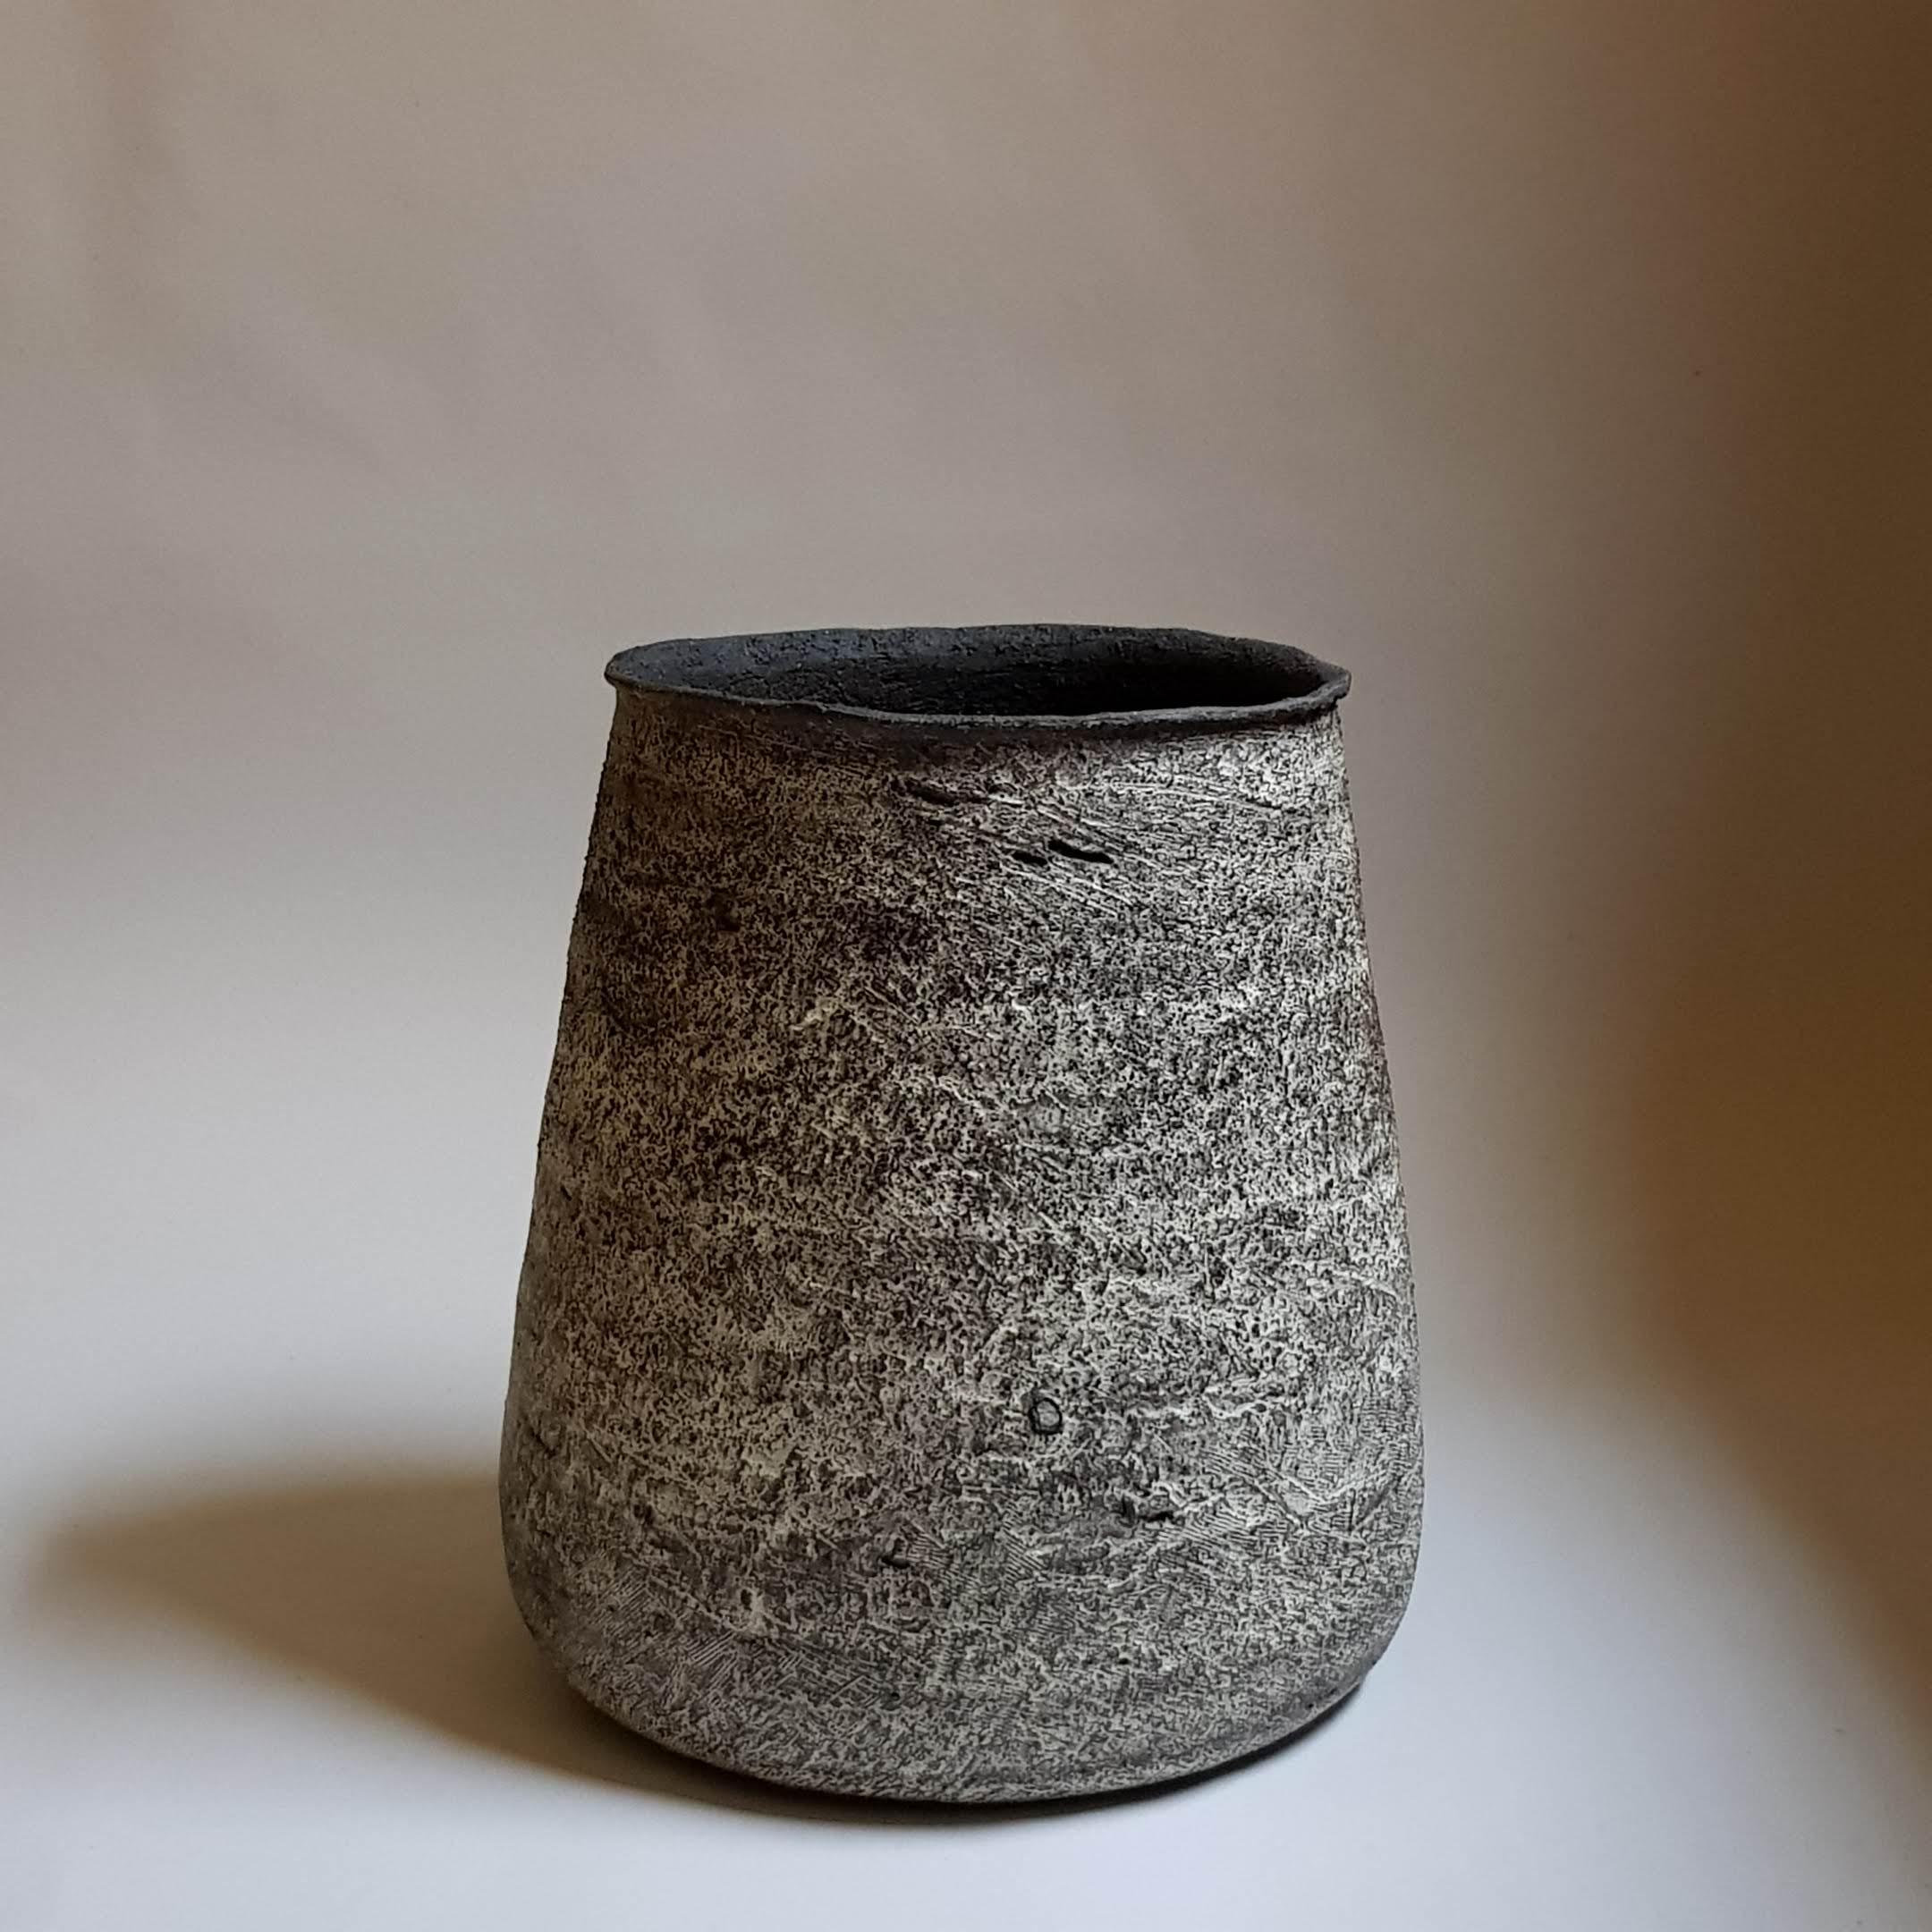 Black Stoneware Kalathos Vase by Elena Vasilantonaki
Unique
Dimensions: ⌀ 20 x H 23 cm (Dimensions may vary)
Materials: Stoneware
Available finishes: Black, White, Brown, Red, White Patina

Growing up in Greece I was surrounded by pottery forms that